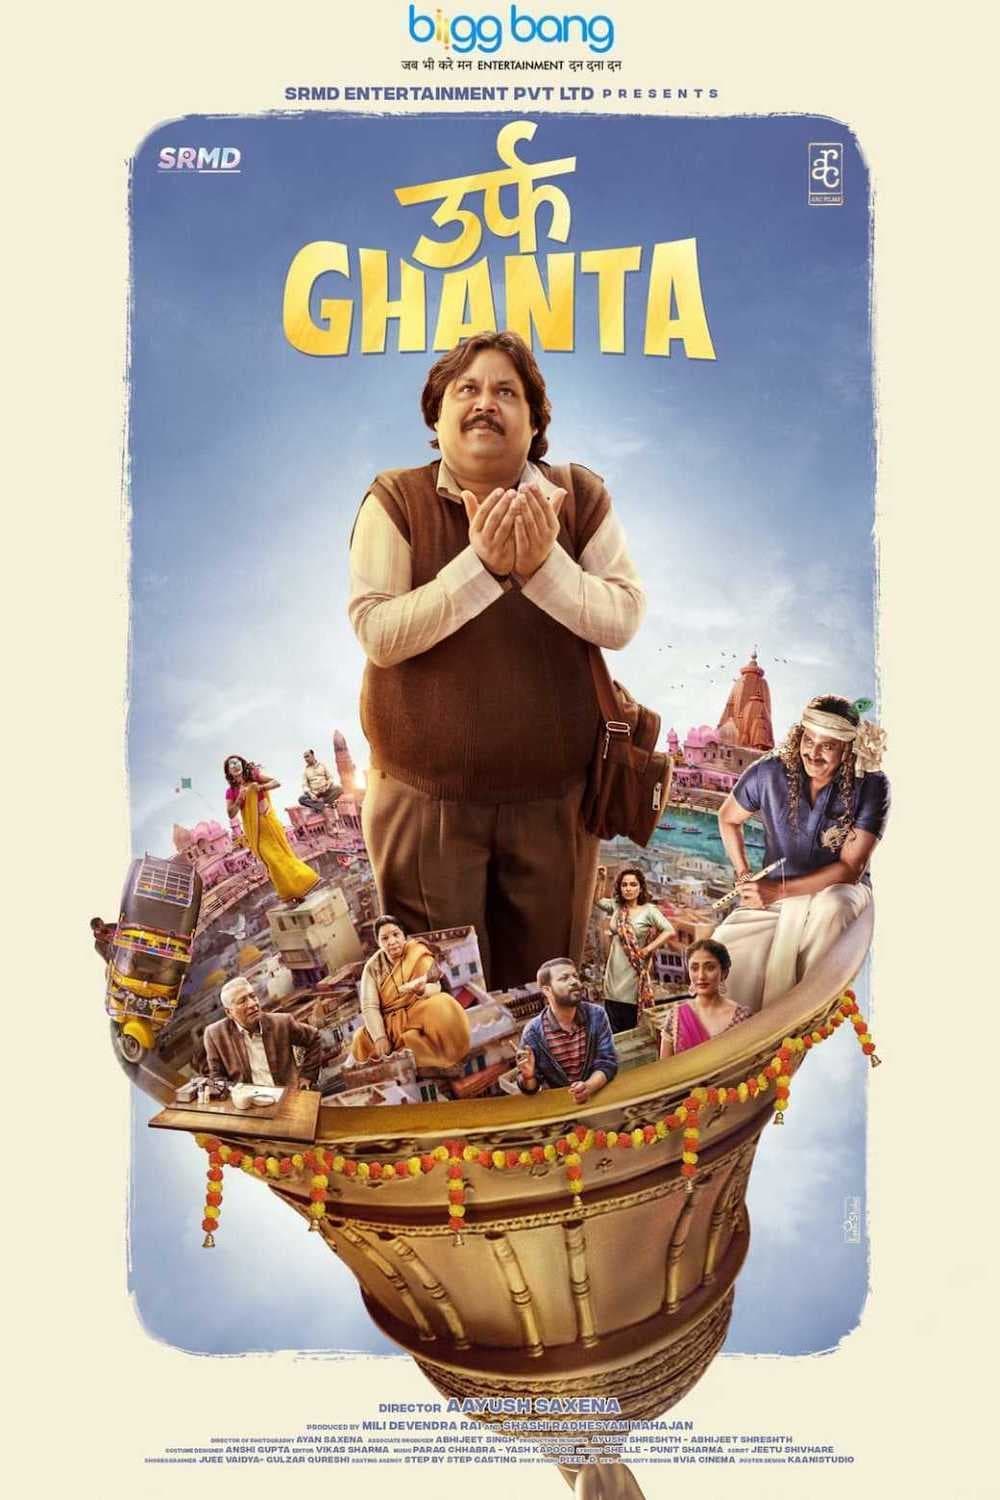 Poster for the movie "Urf Ghanta"